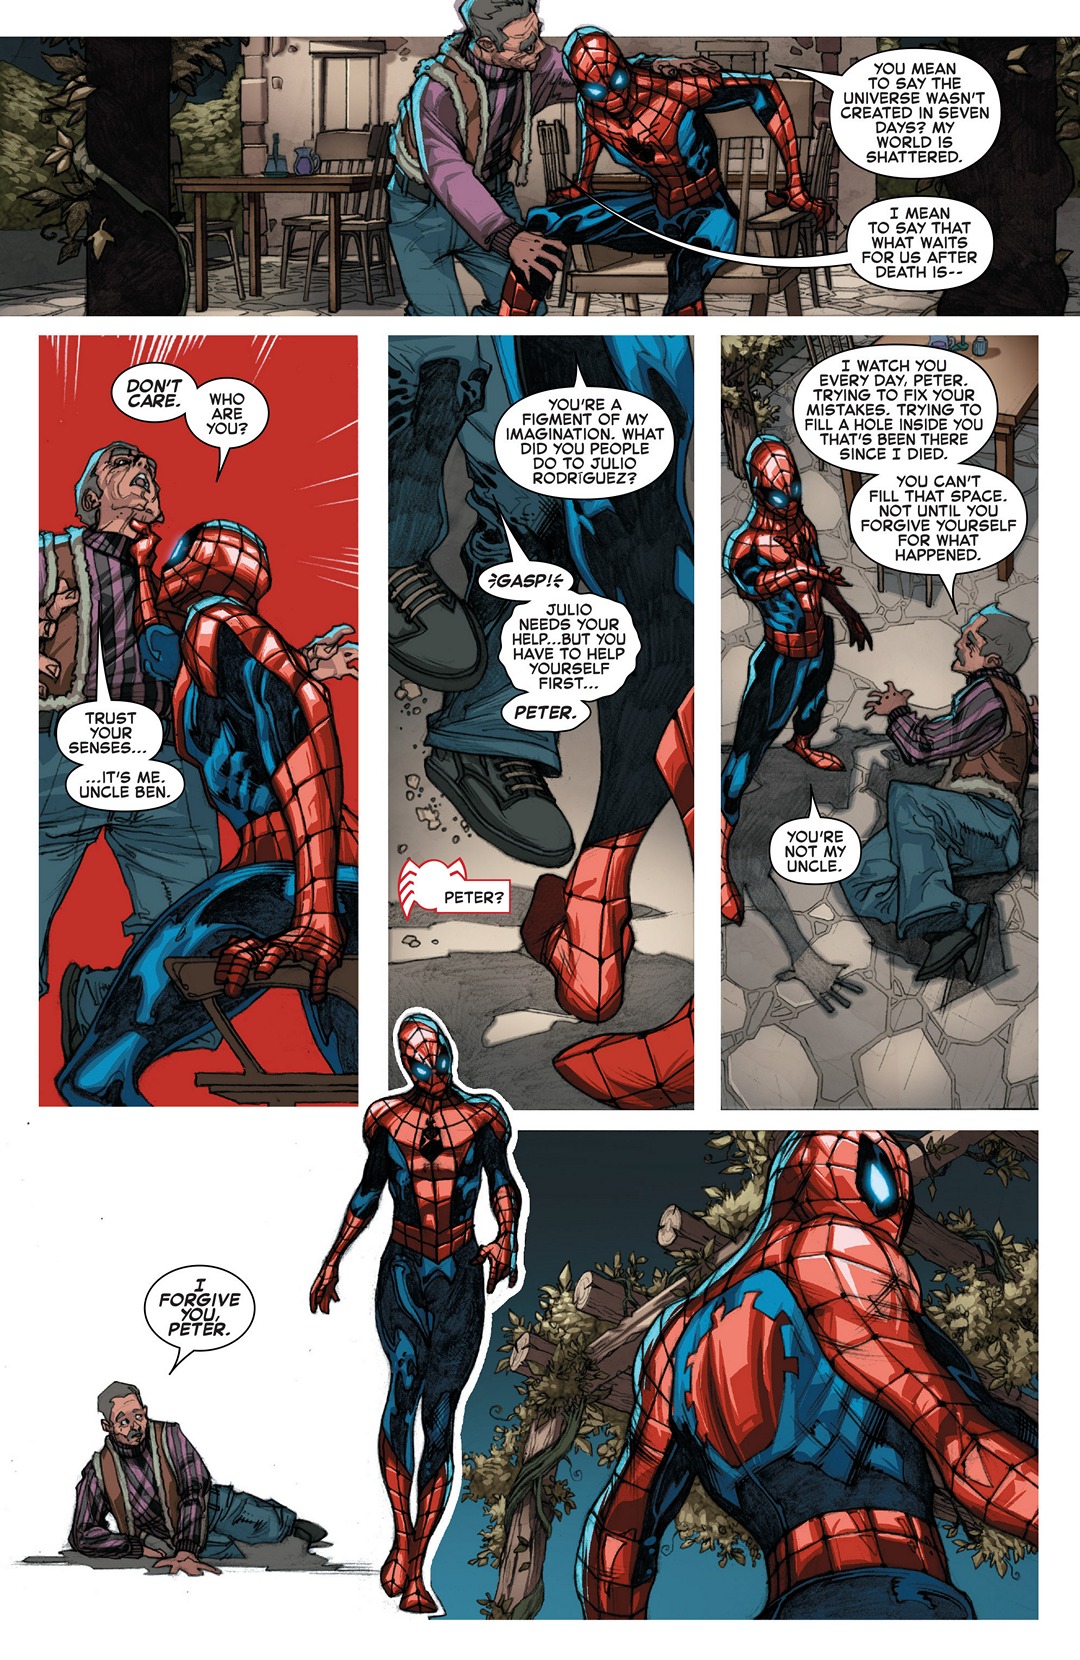 The Amazing Spider-Man (2015-): Chapter 1-3 - Page 4